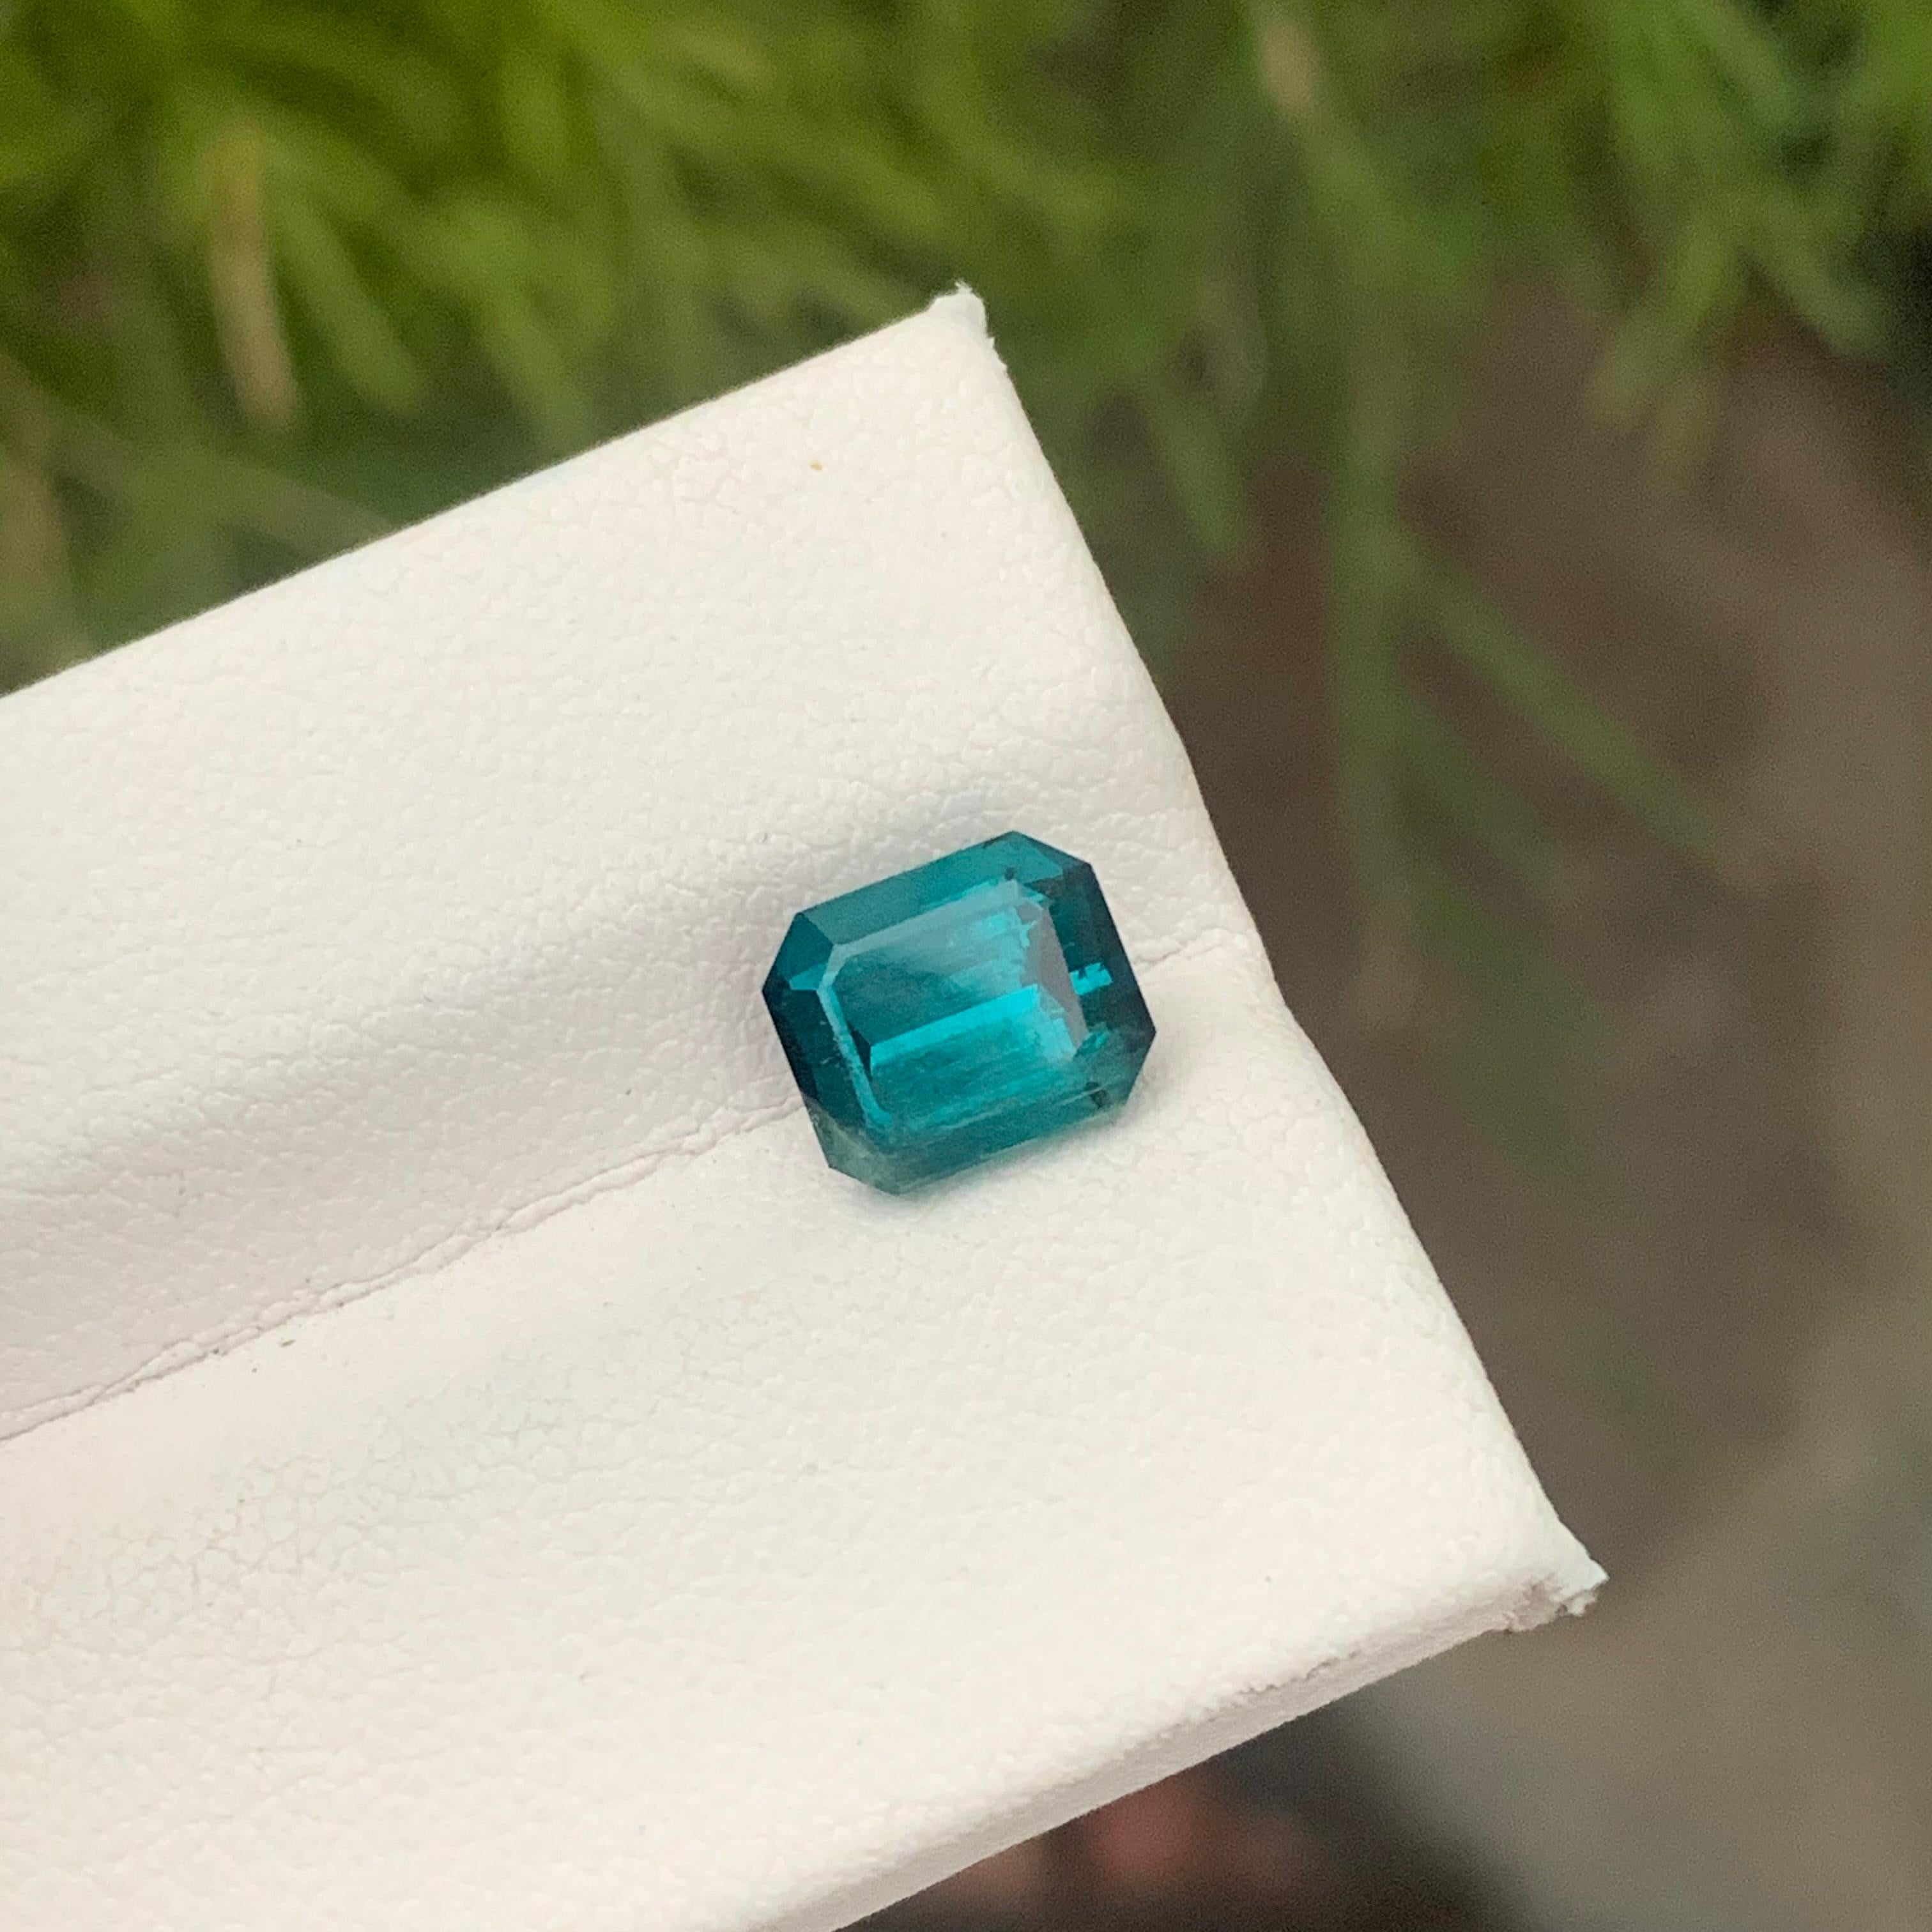 2.75 Carat Included Natural Loose Indicolite Tourmaline Emerald Cut Ring Gem For Sale 2